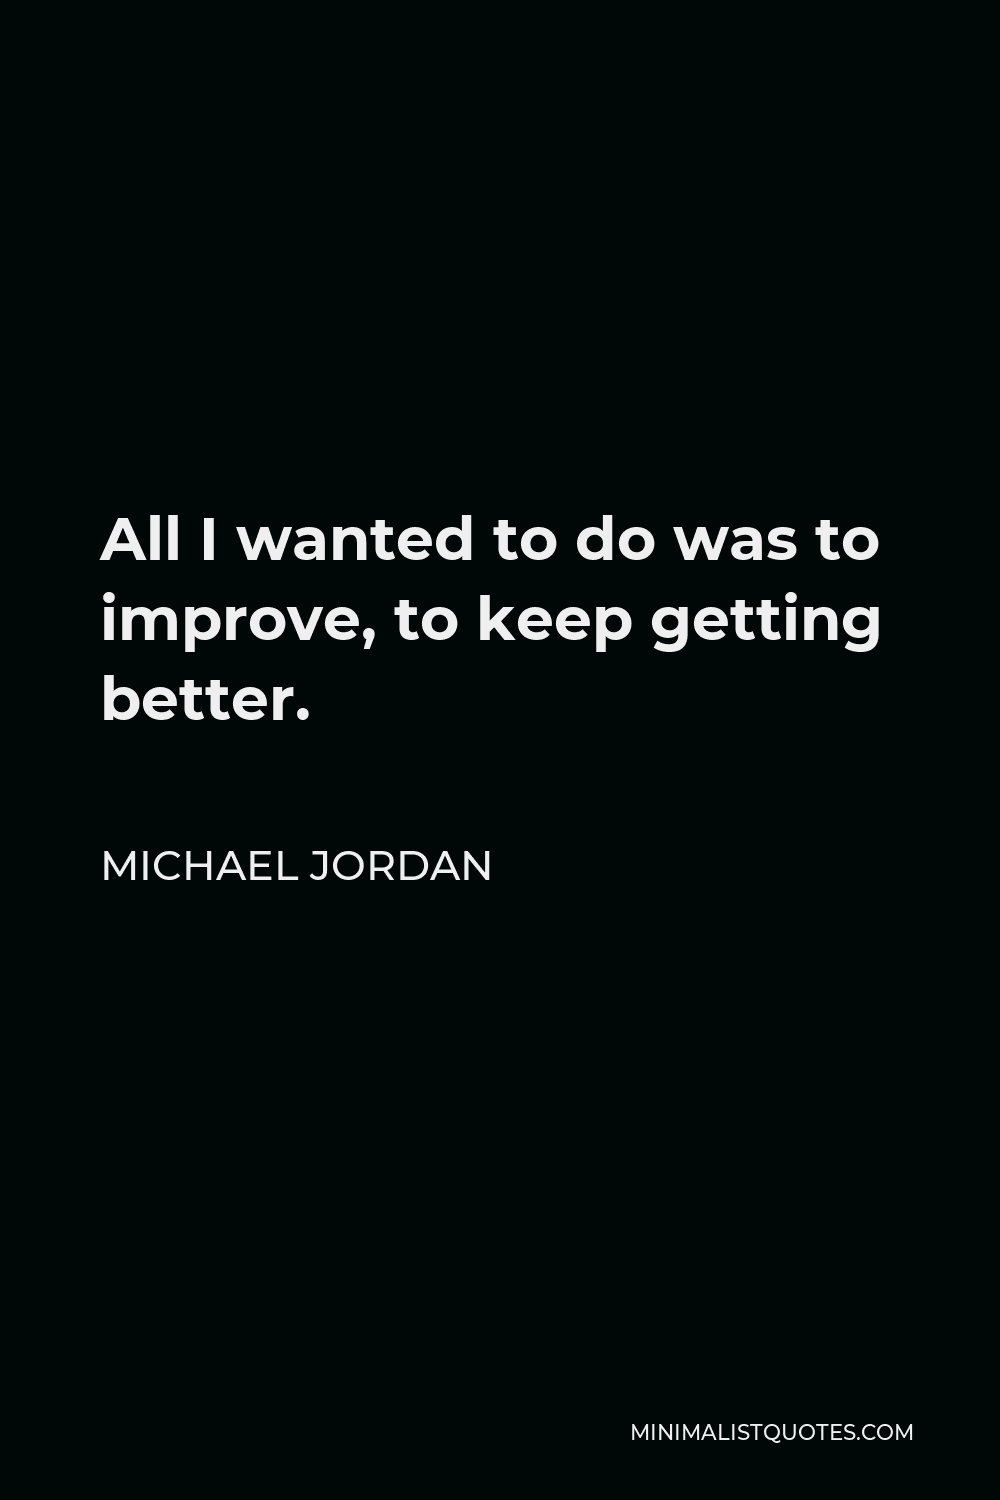 Michael Jordan Quote - All I wanted to do was to improve, to keep getting better.